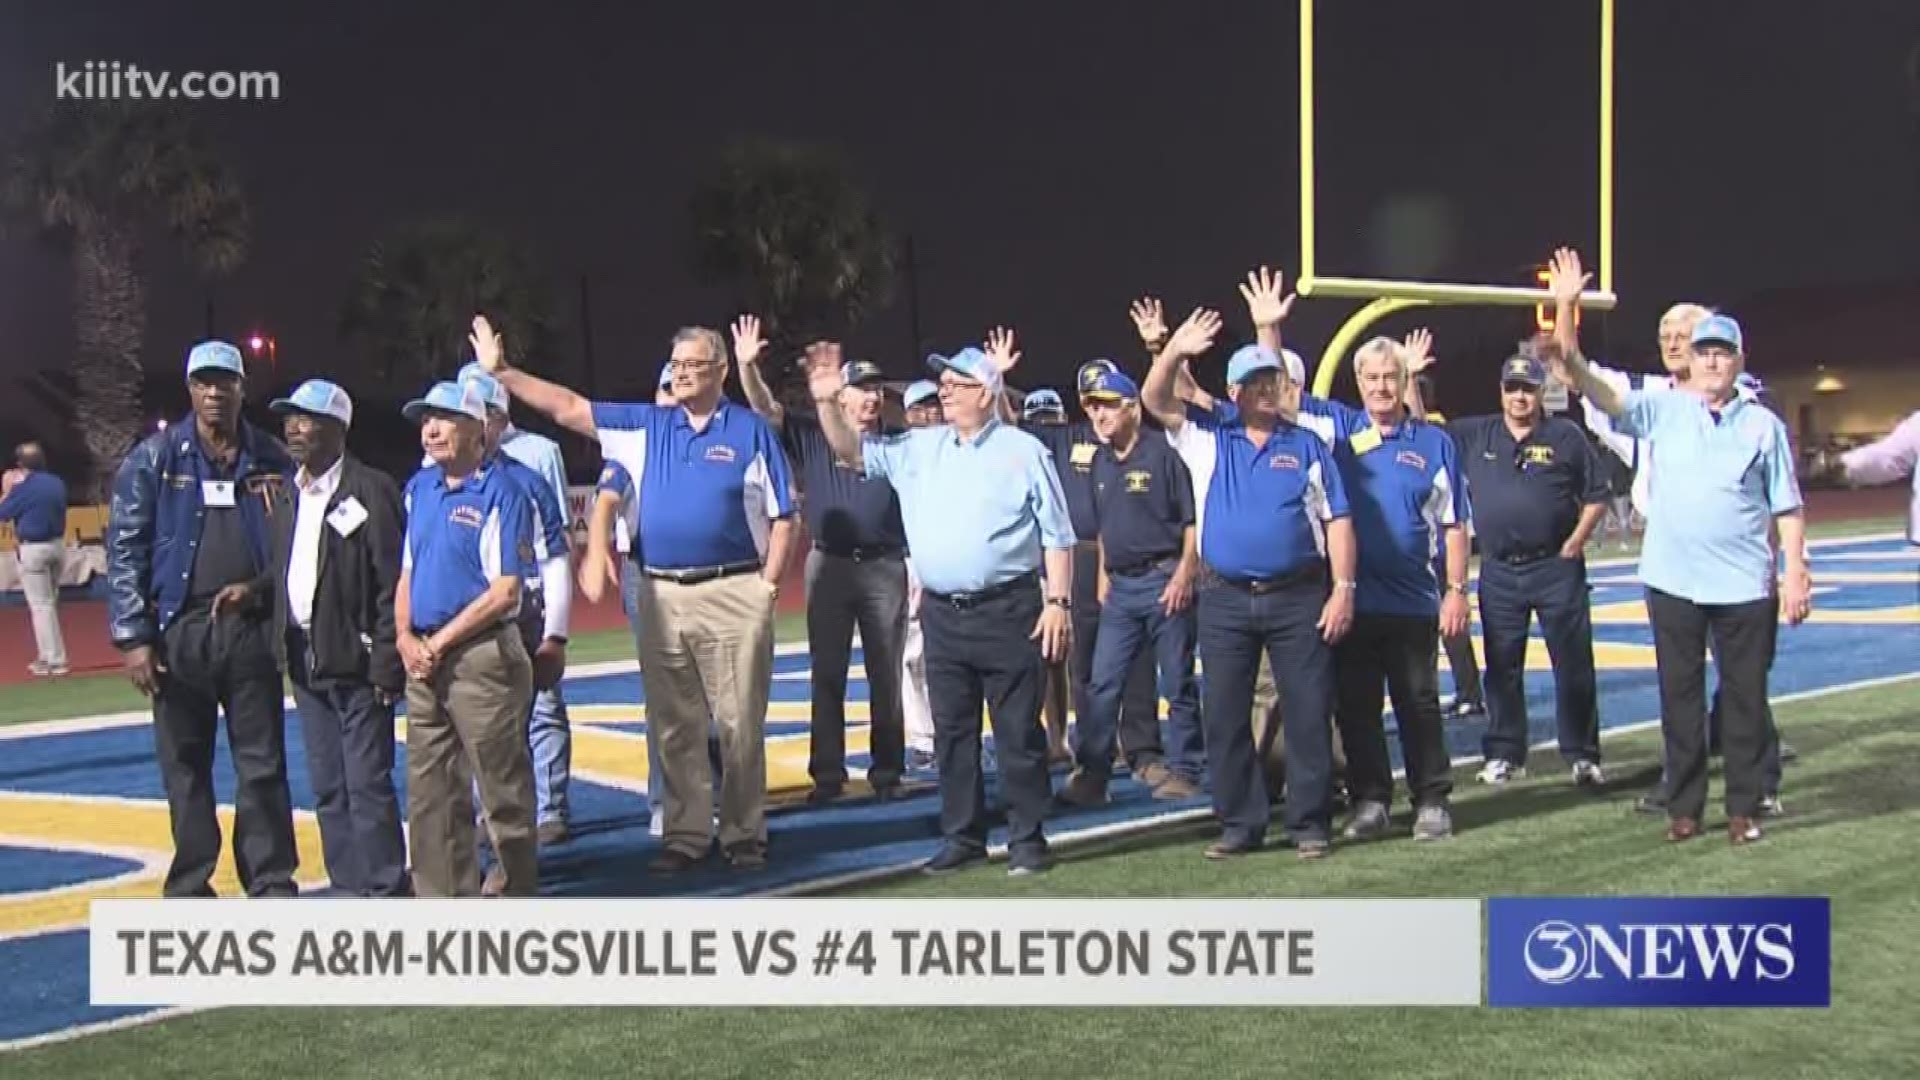 Texas A&M-Kingsville lost it's 6th consecutive game Saturday night to No. 4 Tarleton State 45-33.